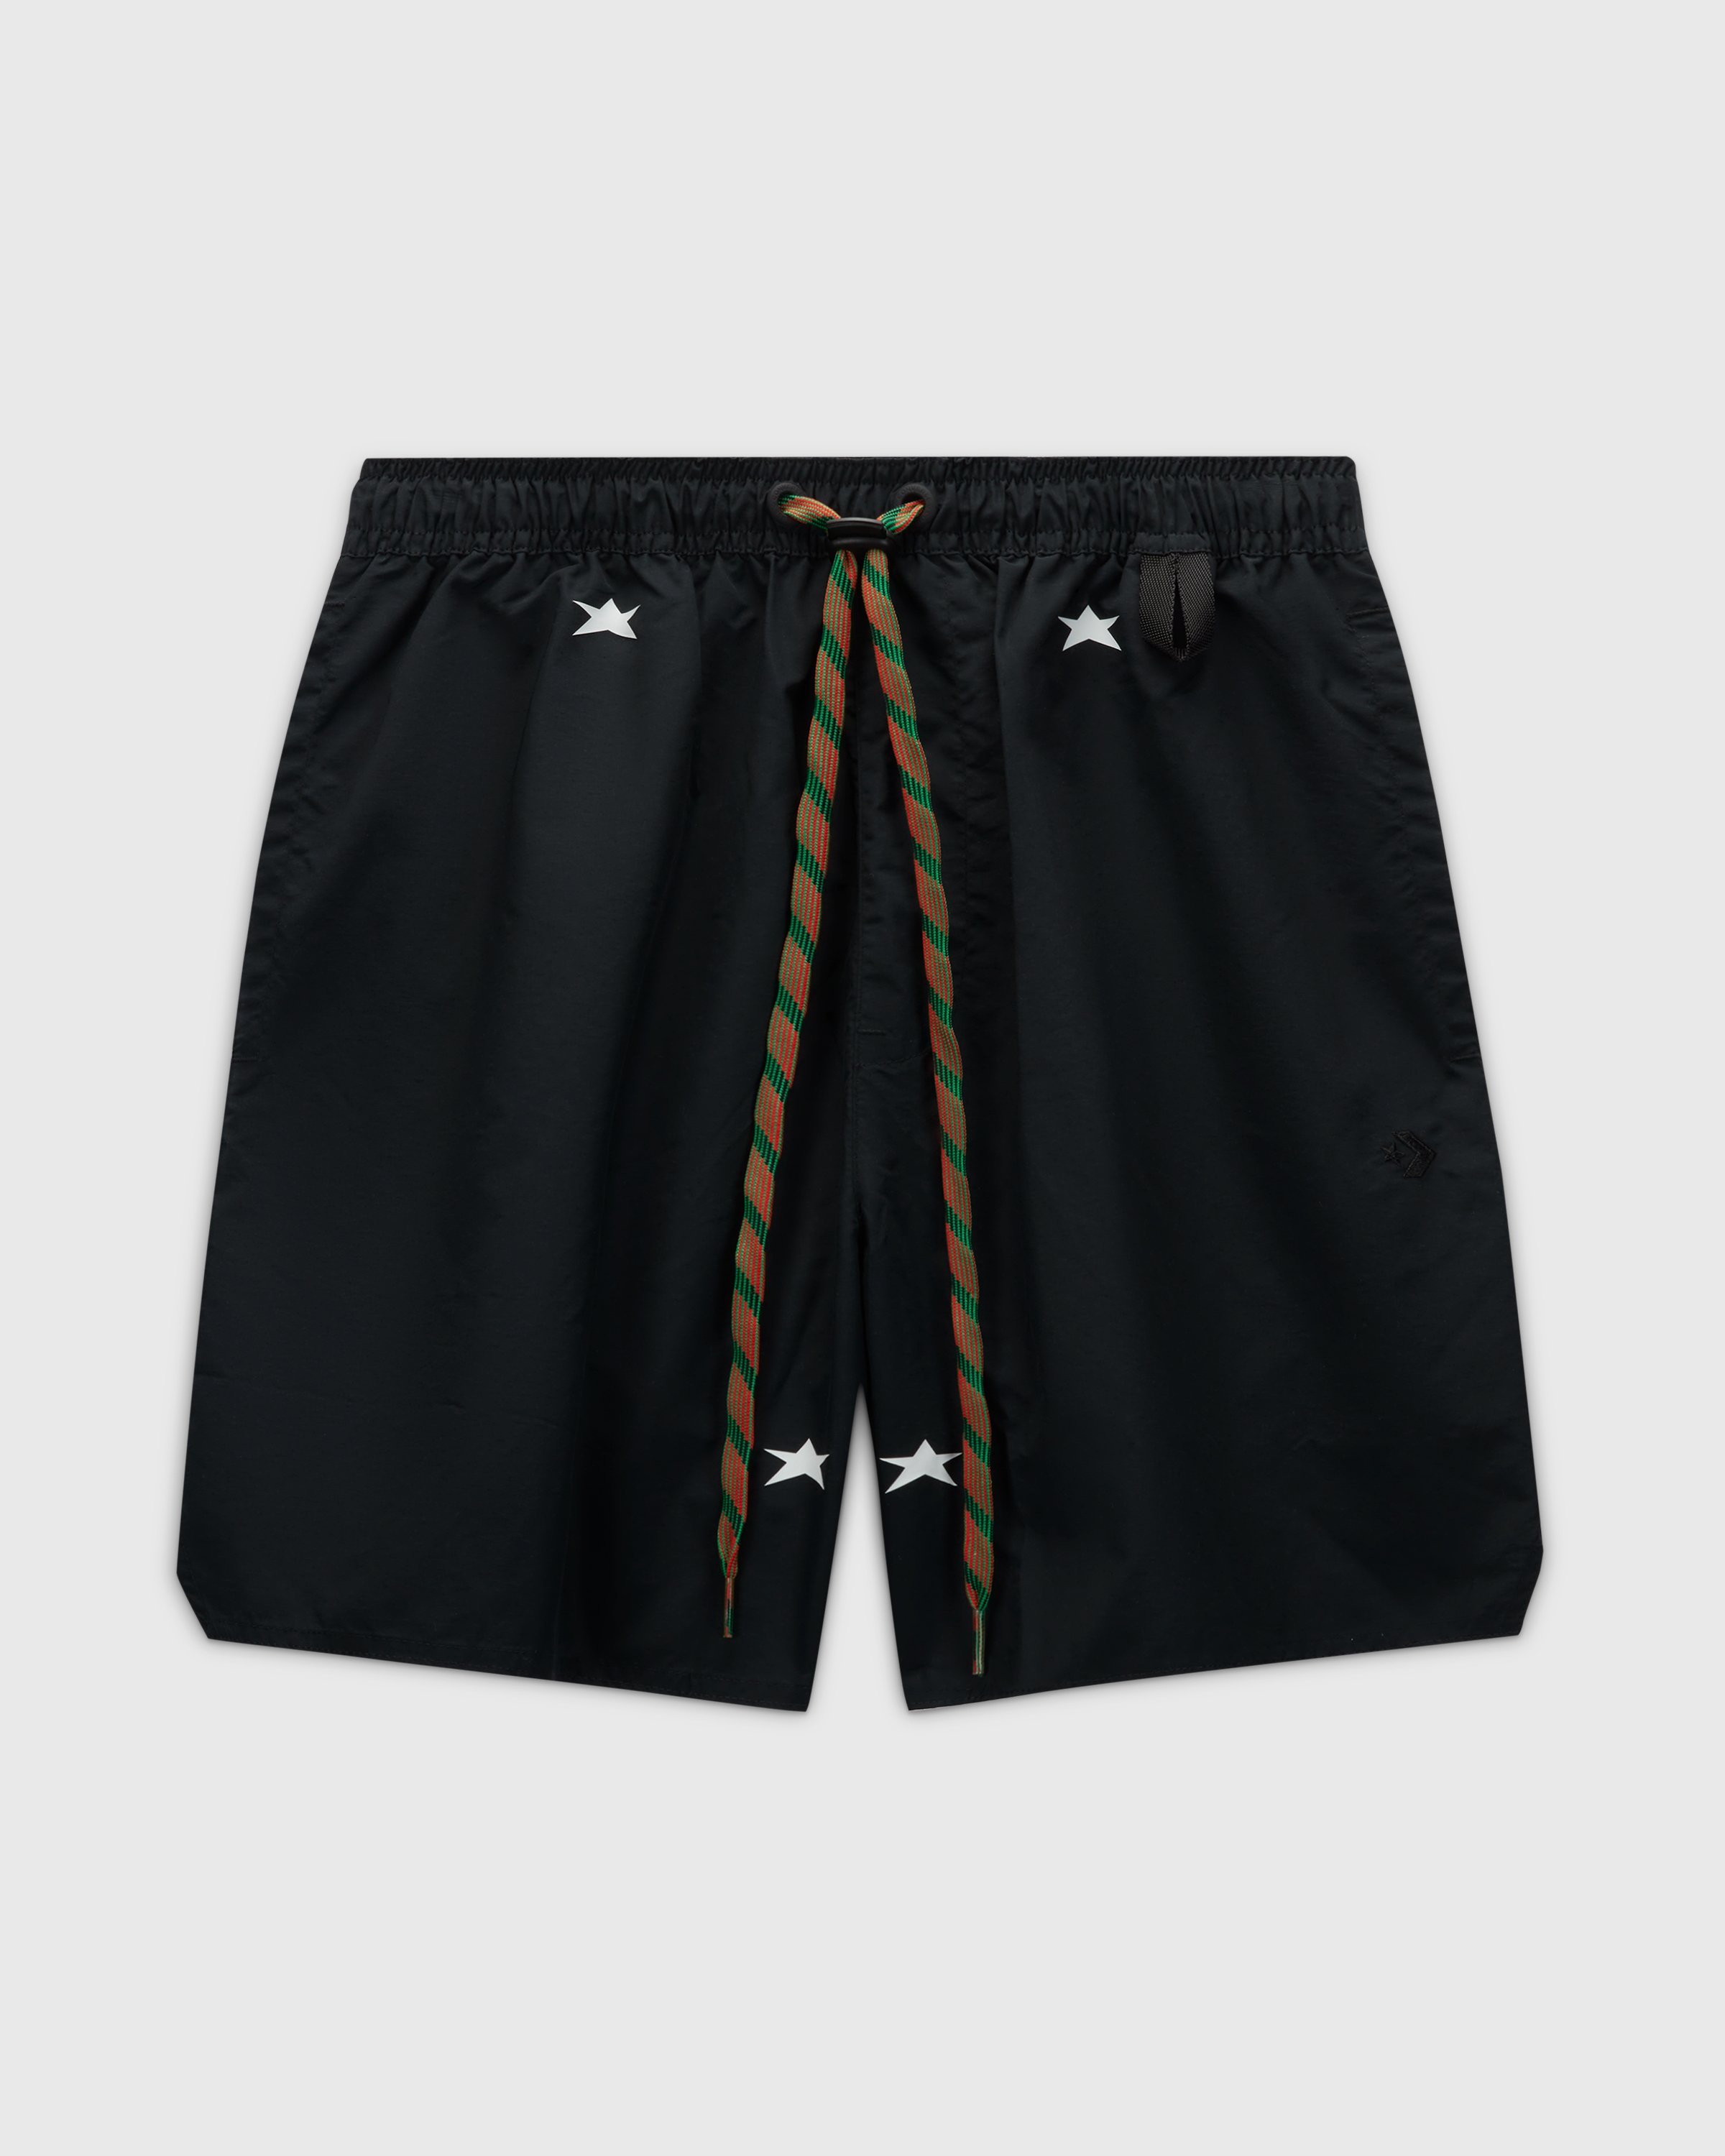 Converse x Barriers - Court Ready Cutter Shorts Black - Clothing - Black - Image 1